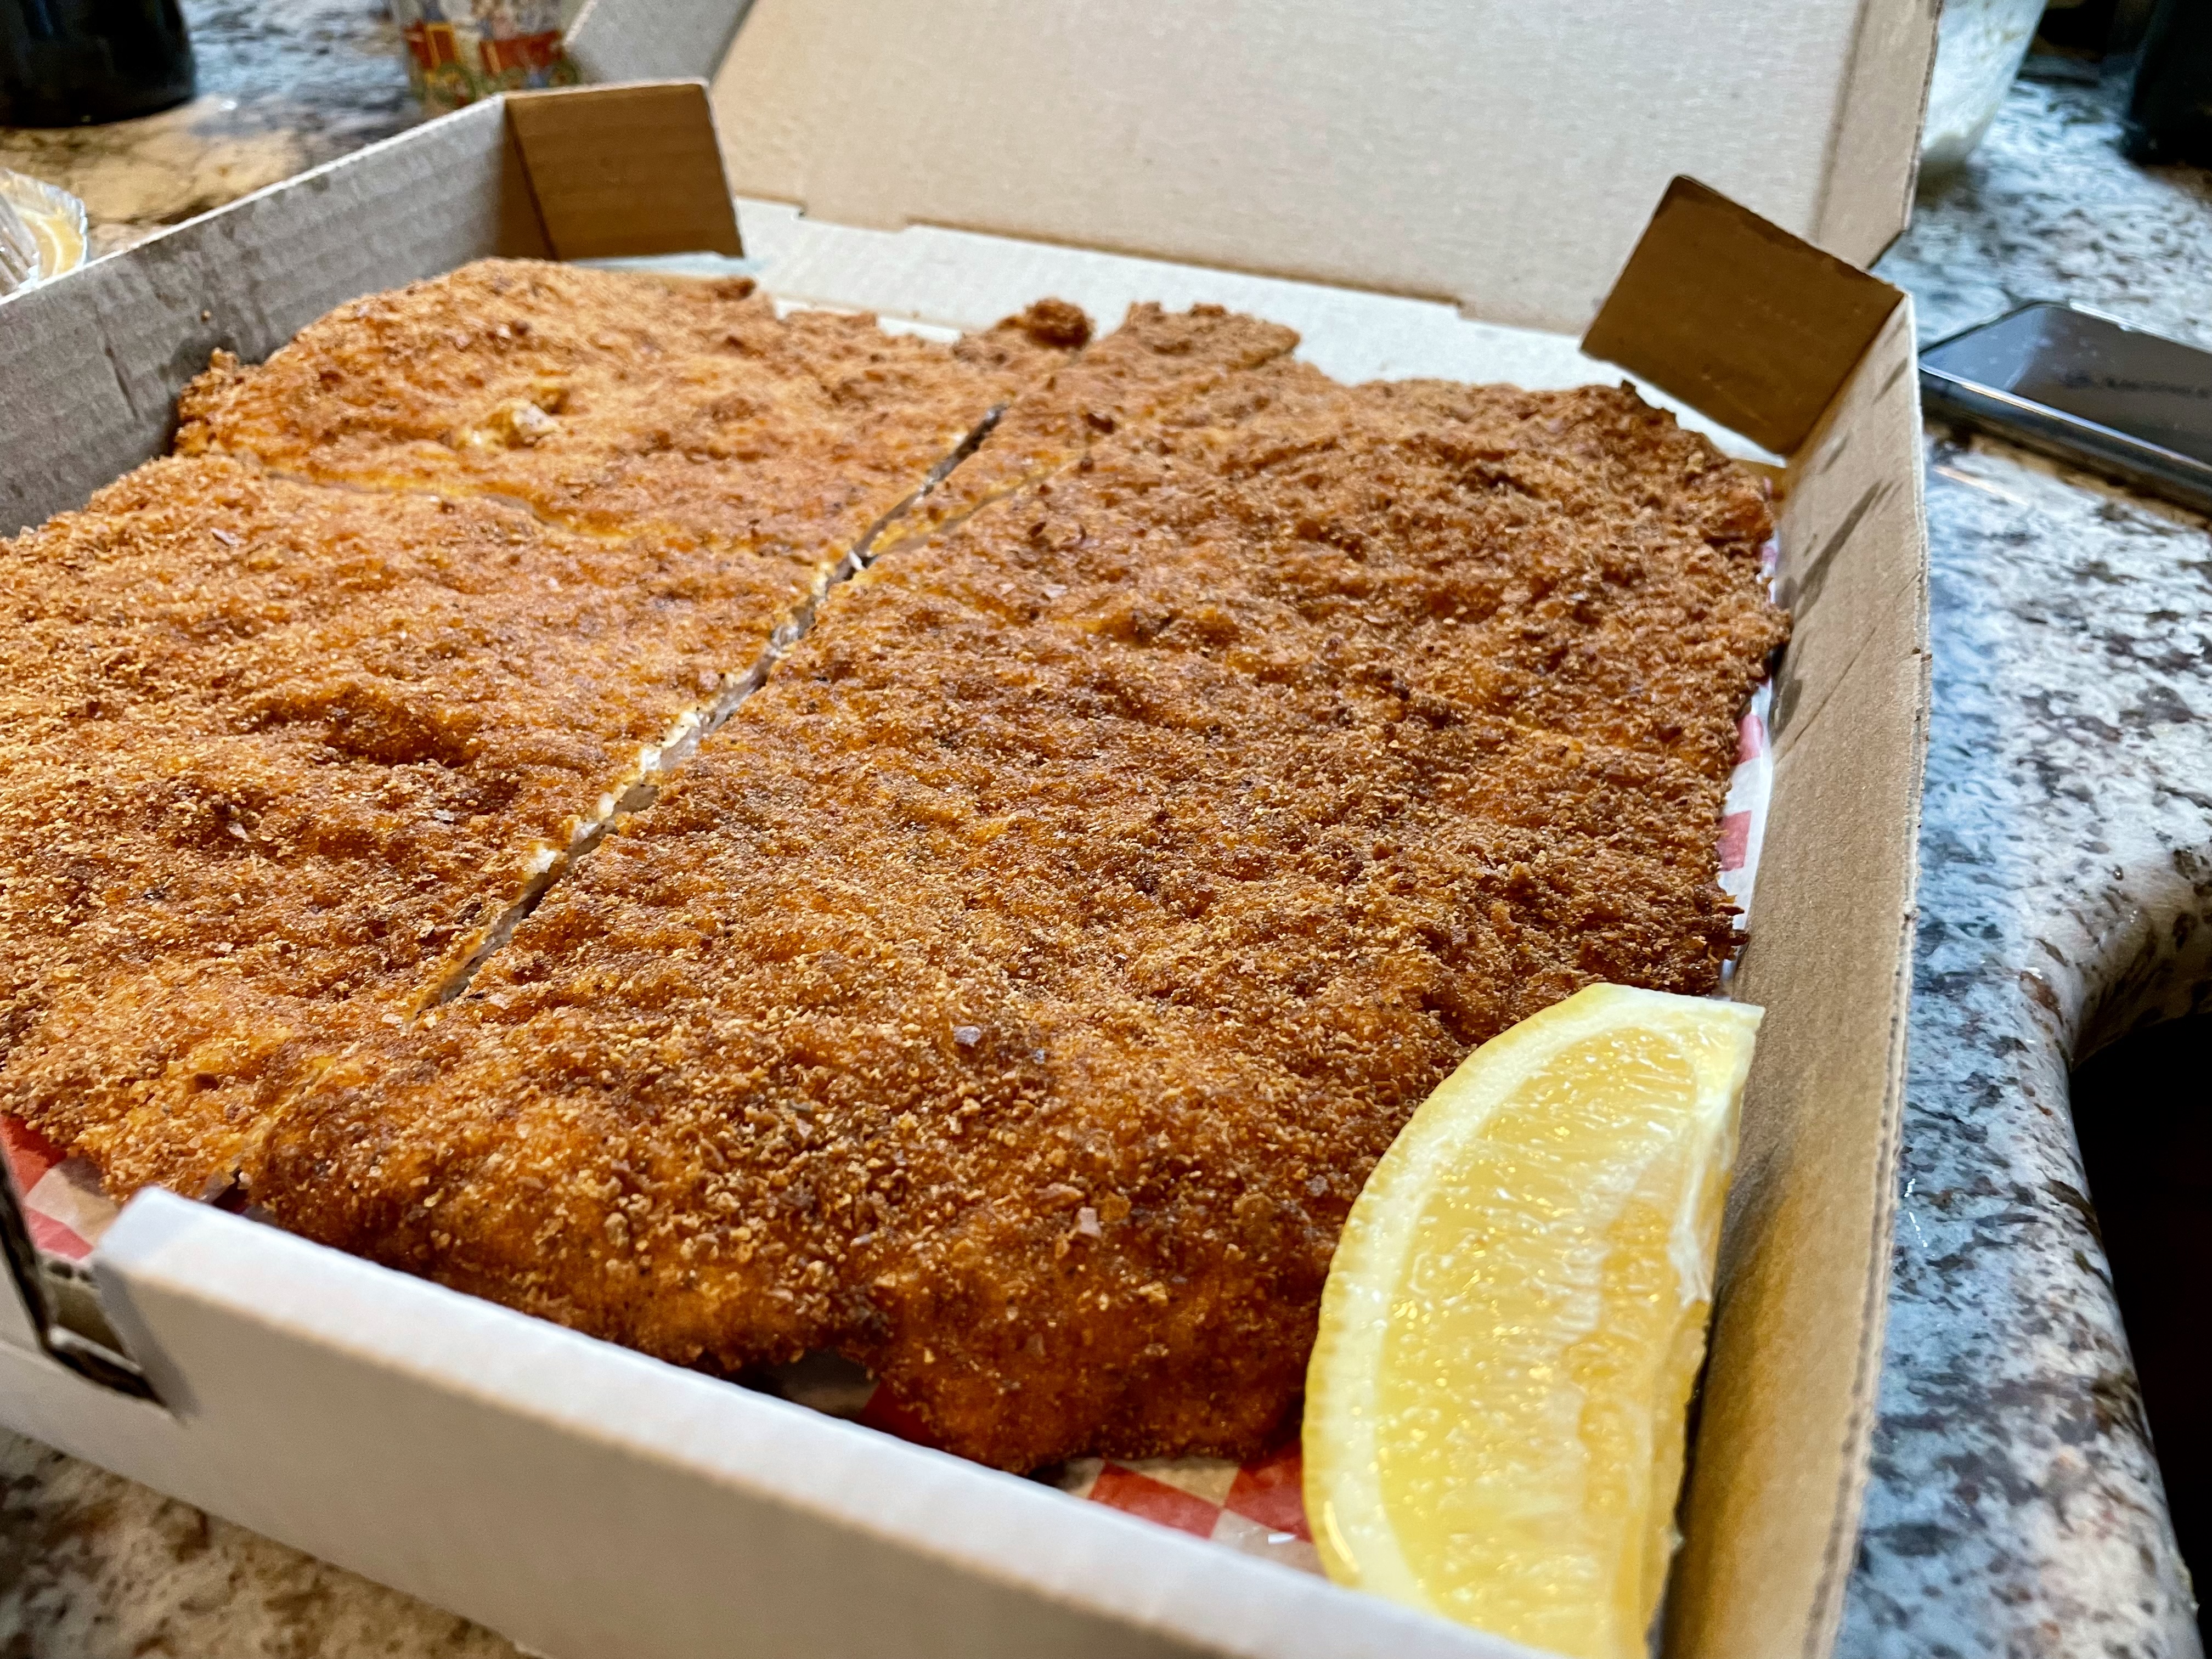 The pork schnitzel was packed into a pizza box and, despite the takeaway dinner, remained crispy throughout the meal